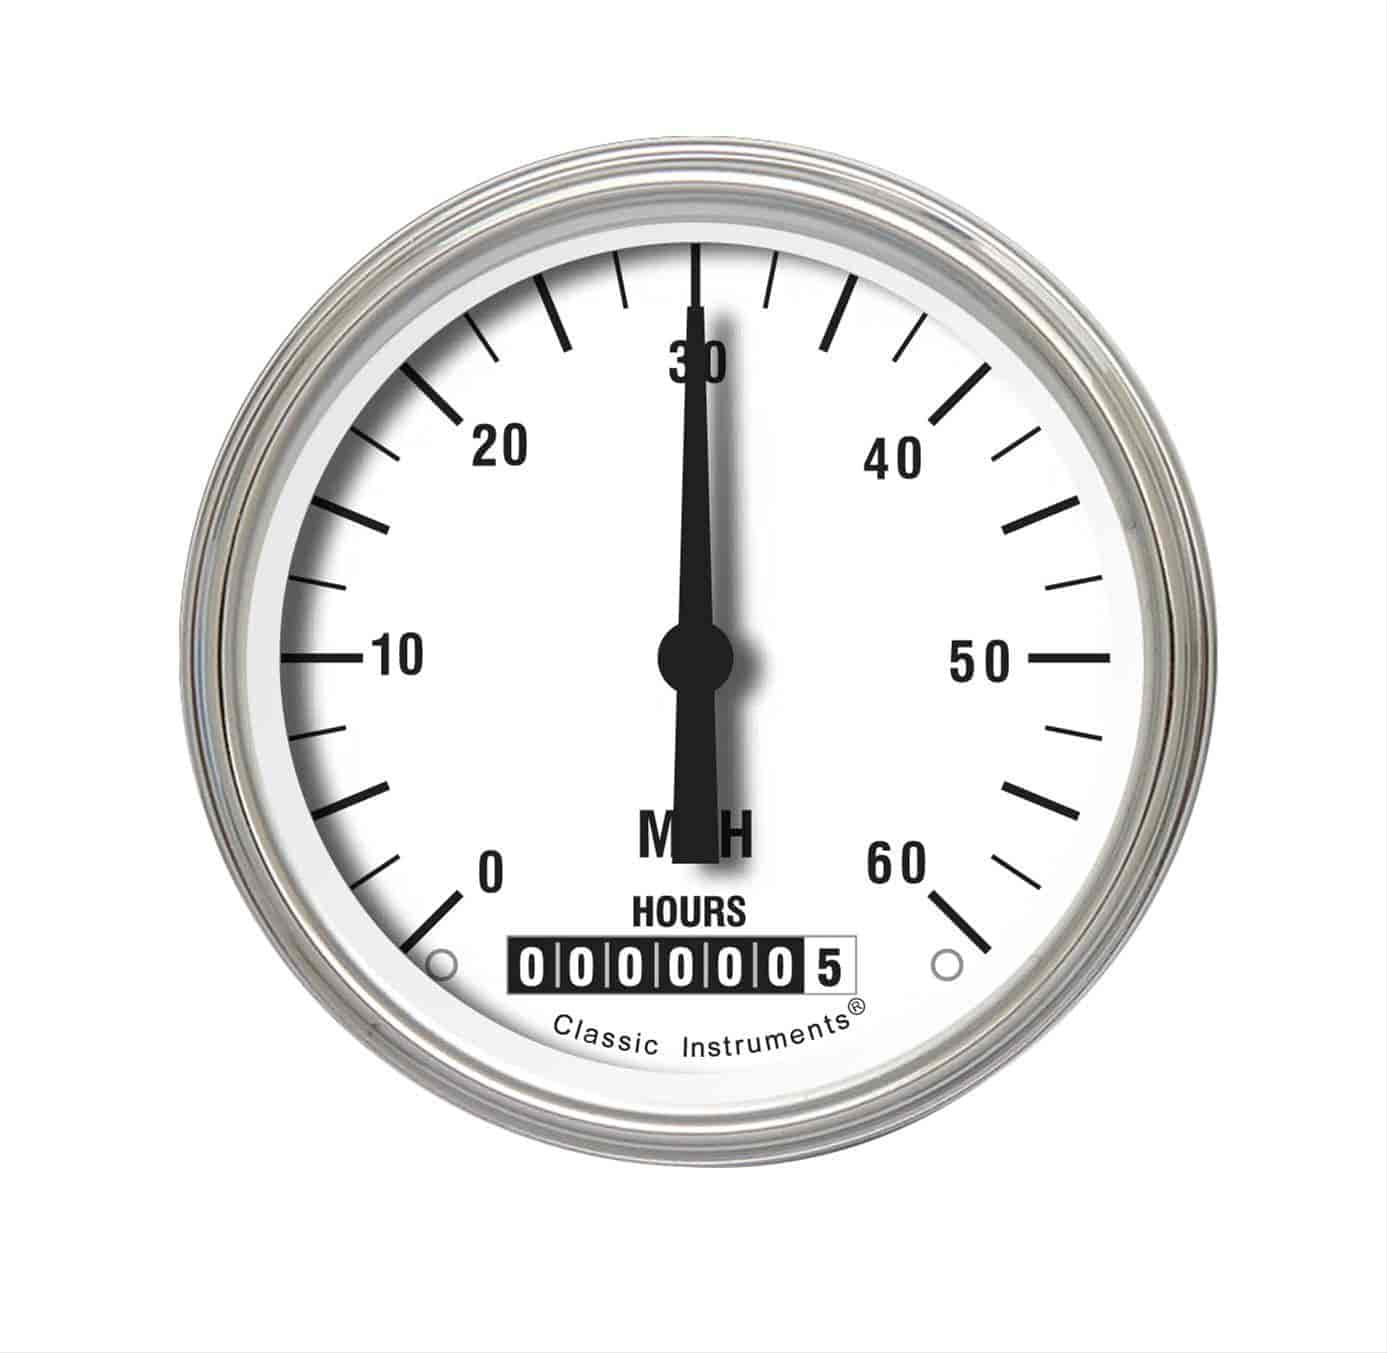 Low Speed Series Speedometer with Hour Meter All